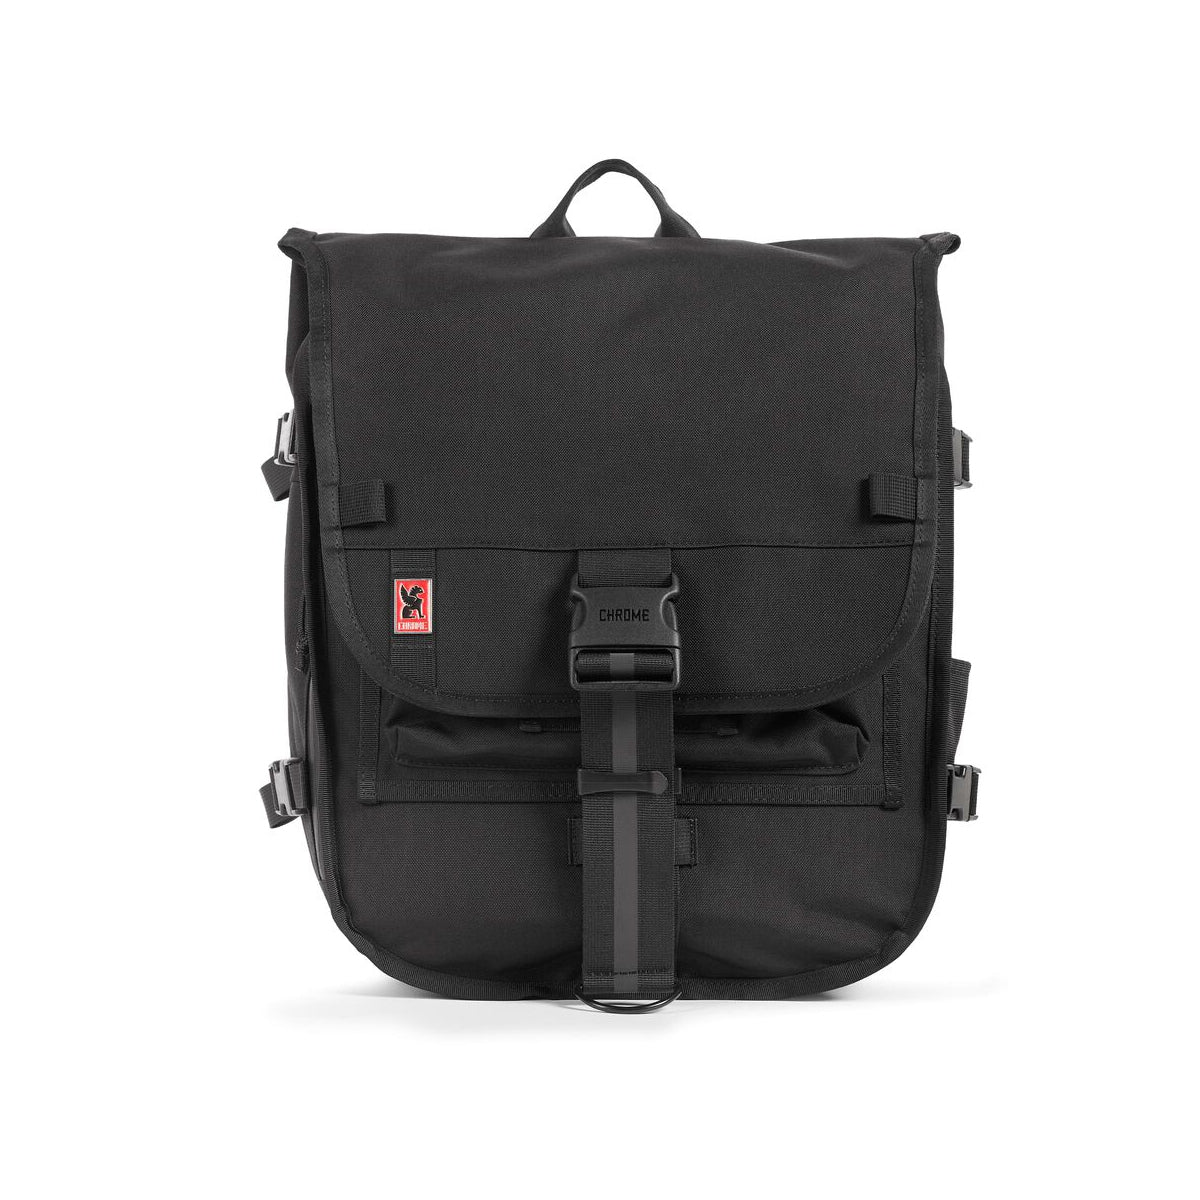 Chrome Industries | Warsaw MD | The Bag Creature